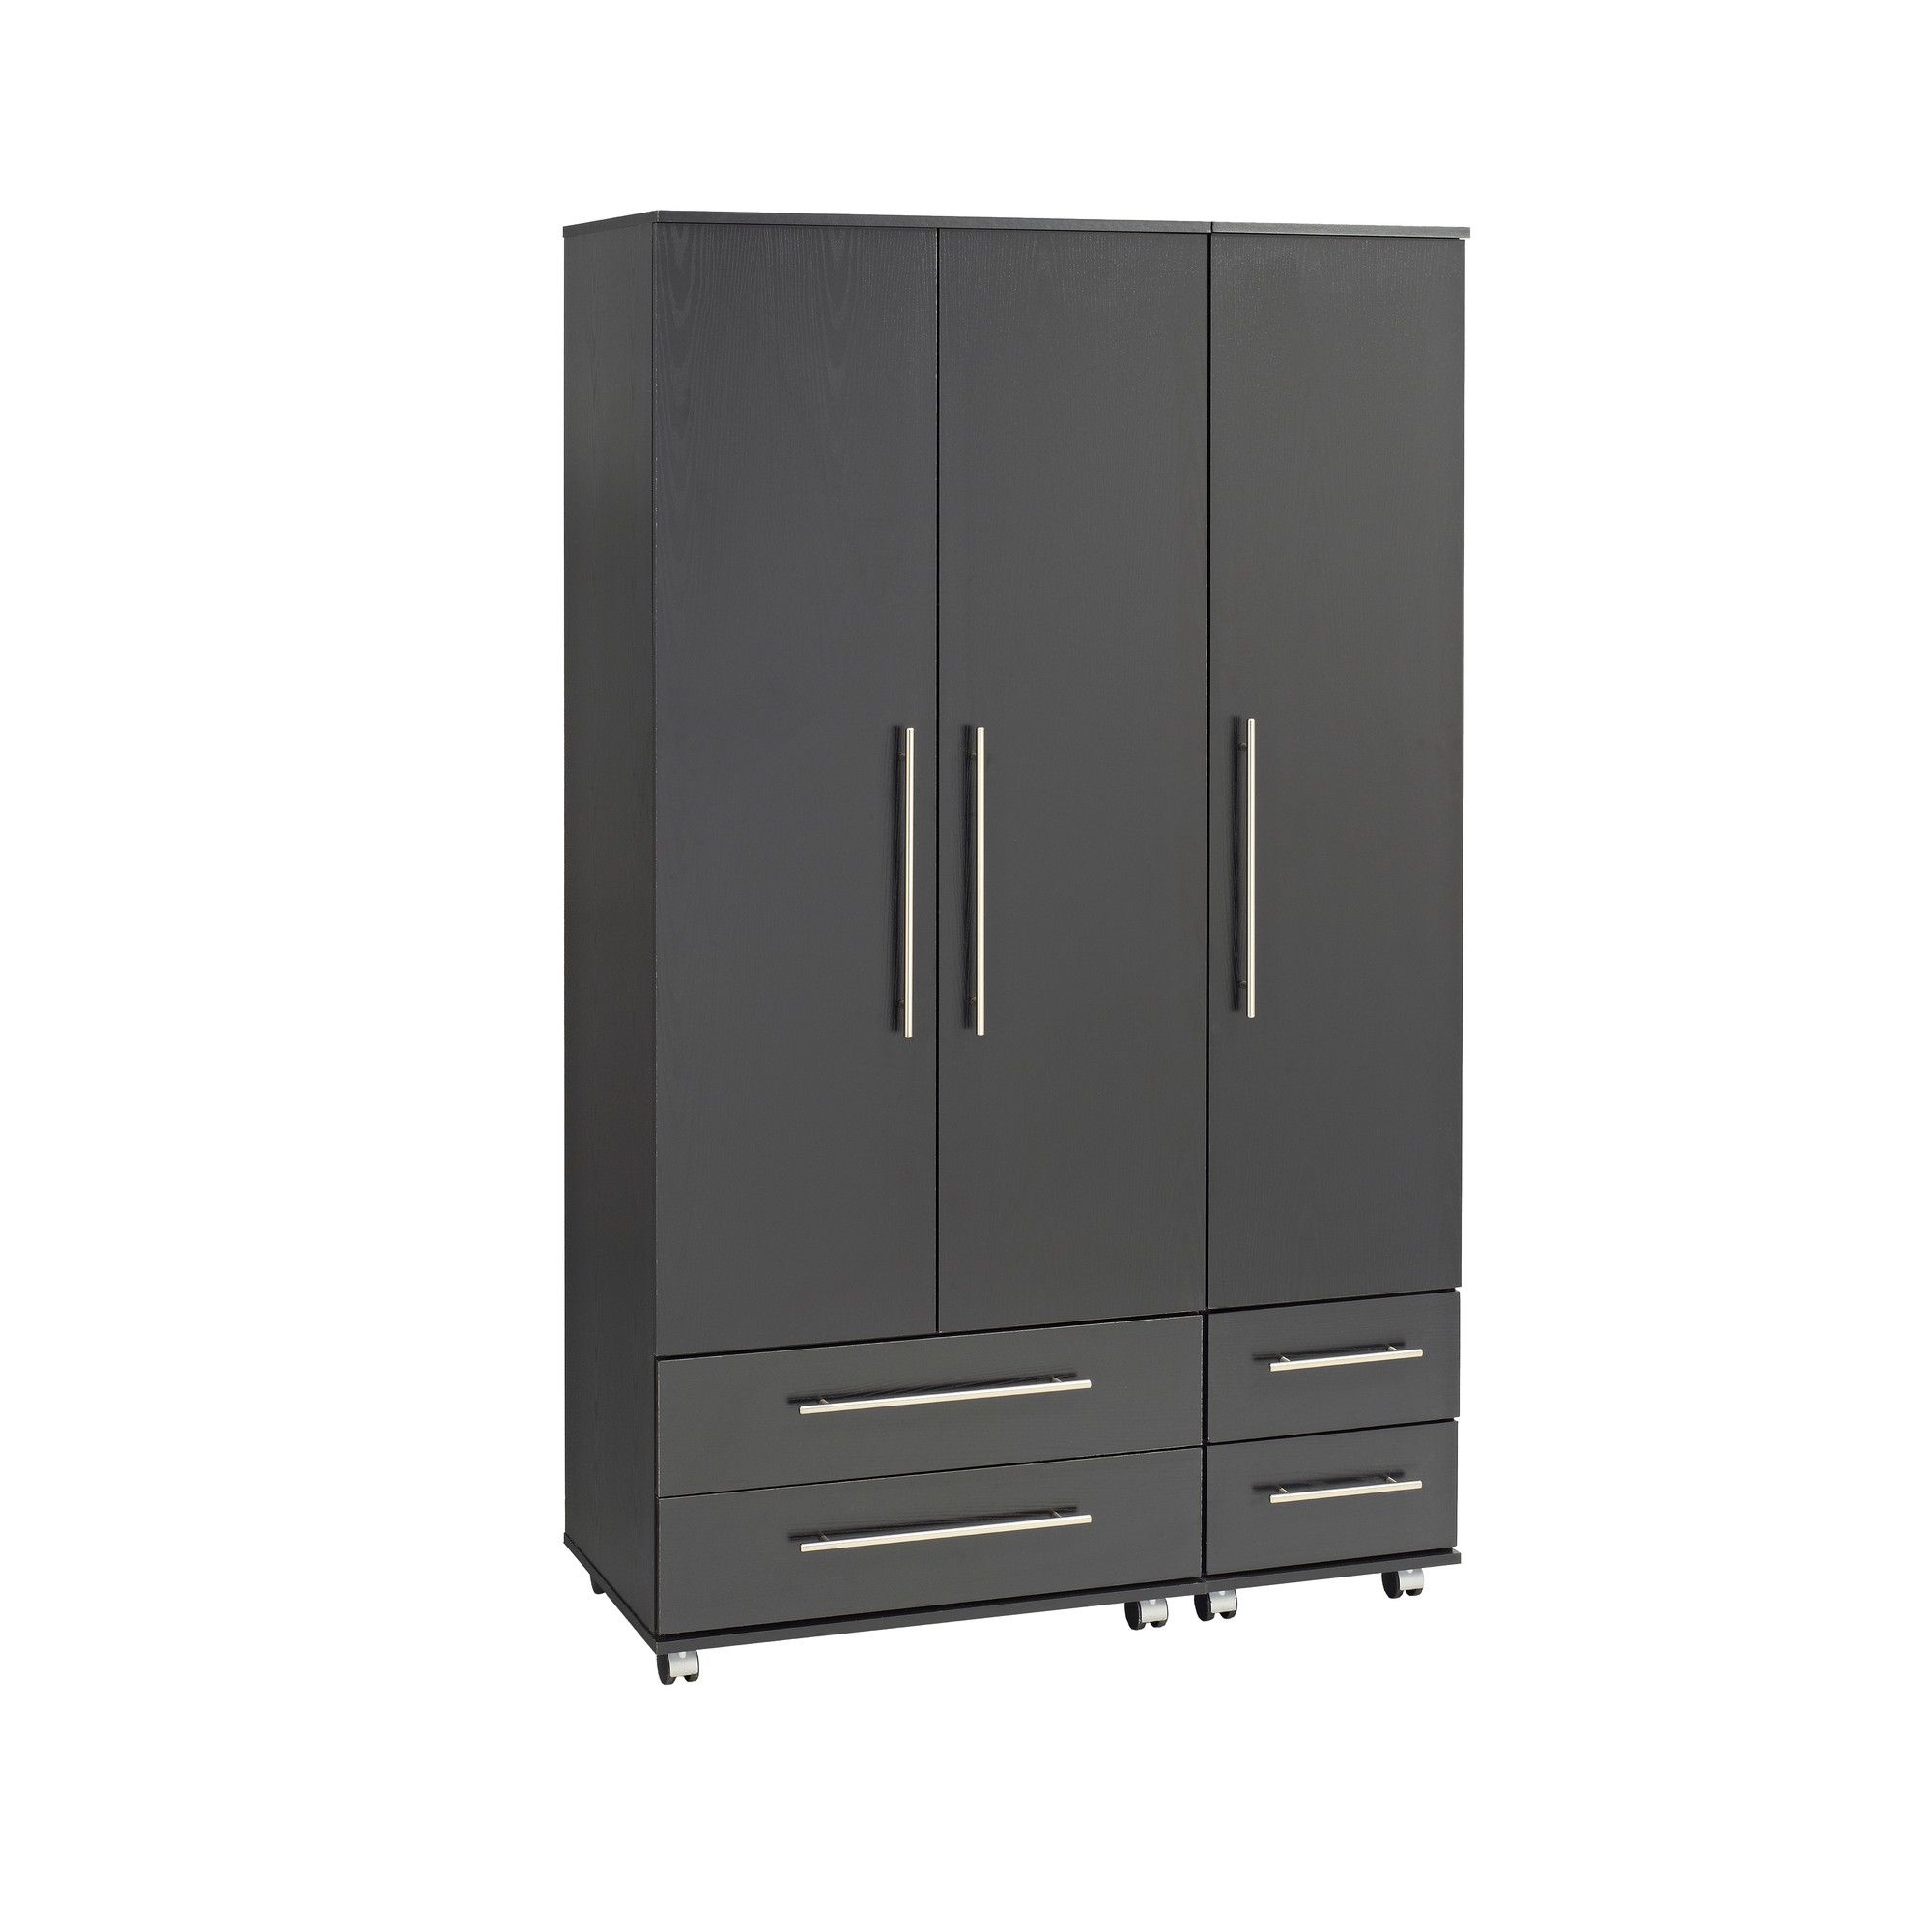 Ideal Furniture Bobby Triple Wardrobe with Four Drawers - Oak at Tesco Direct